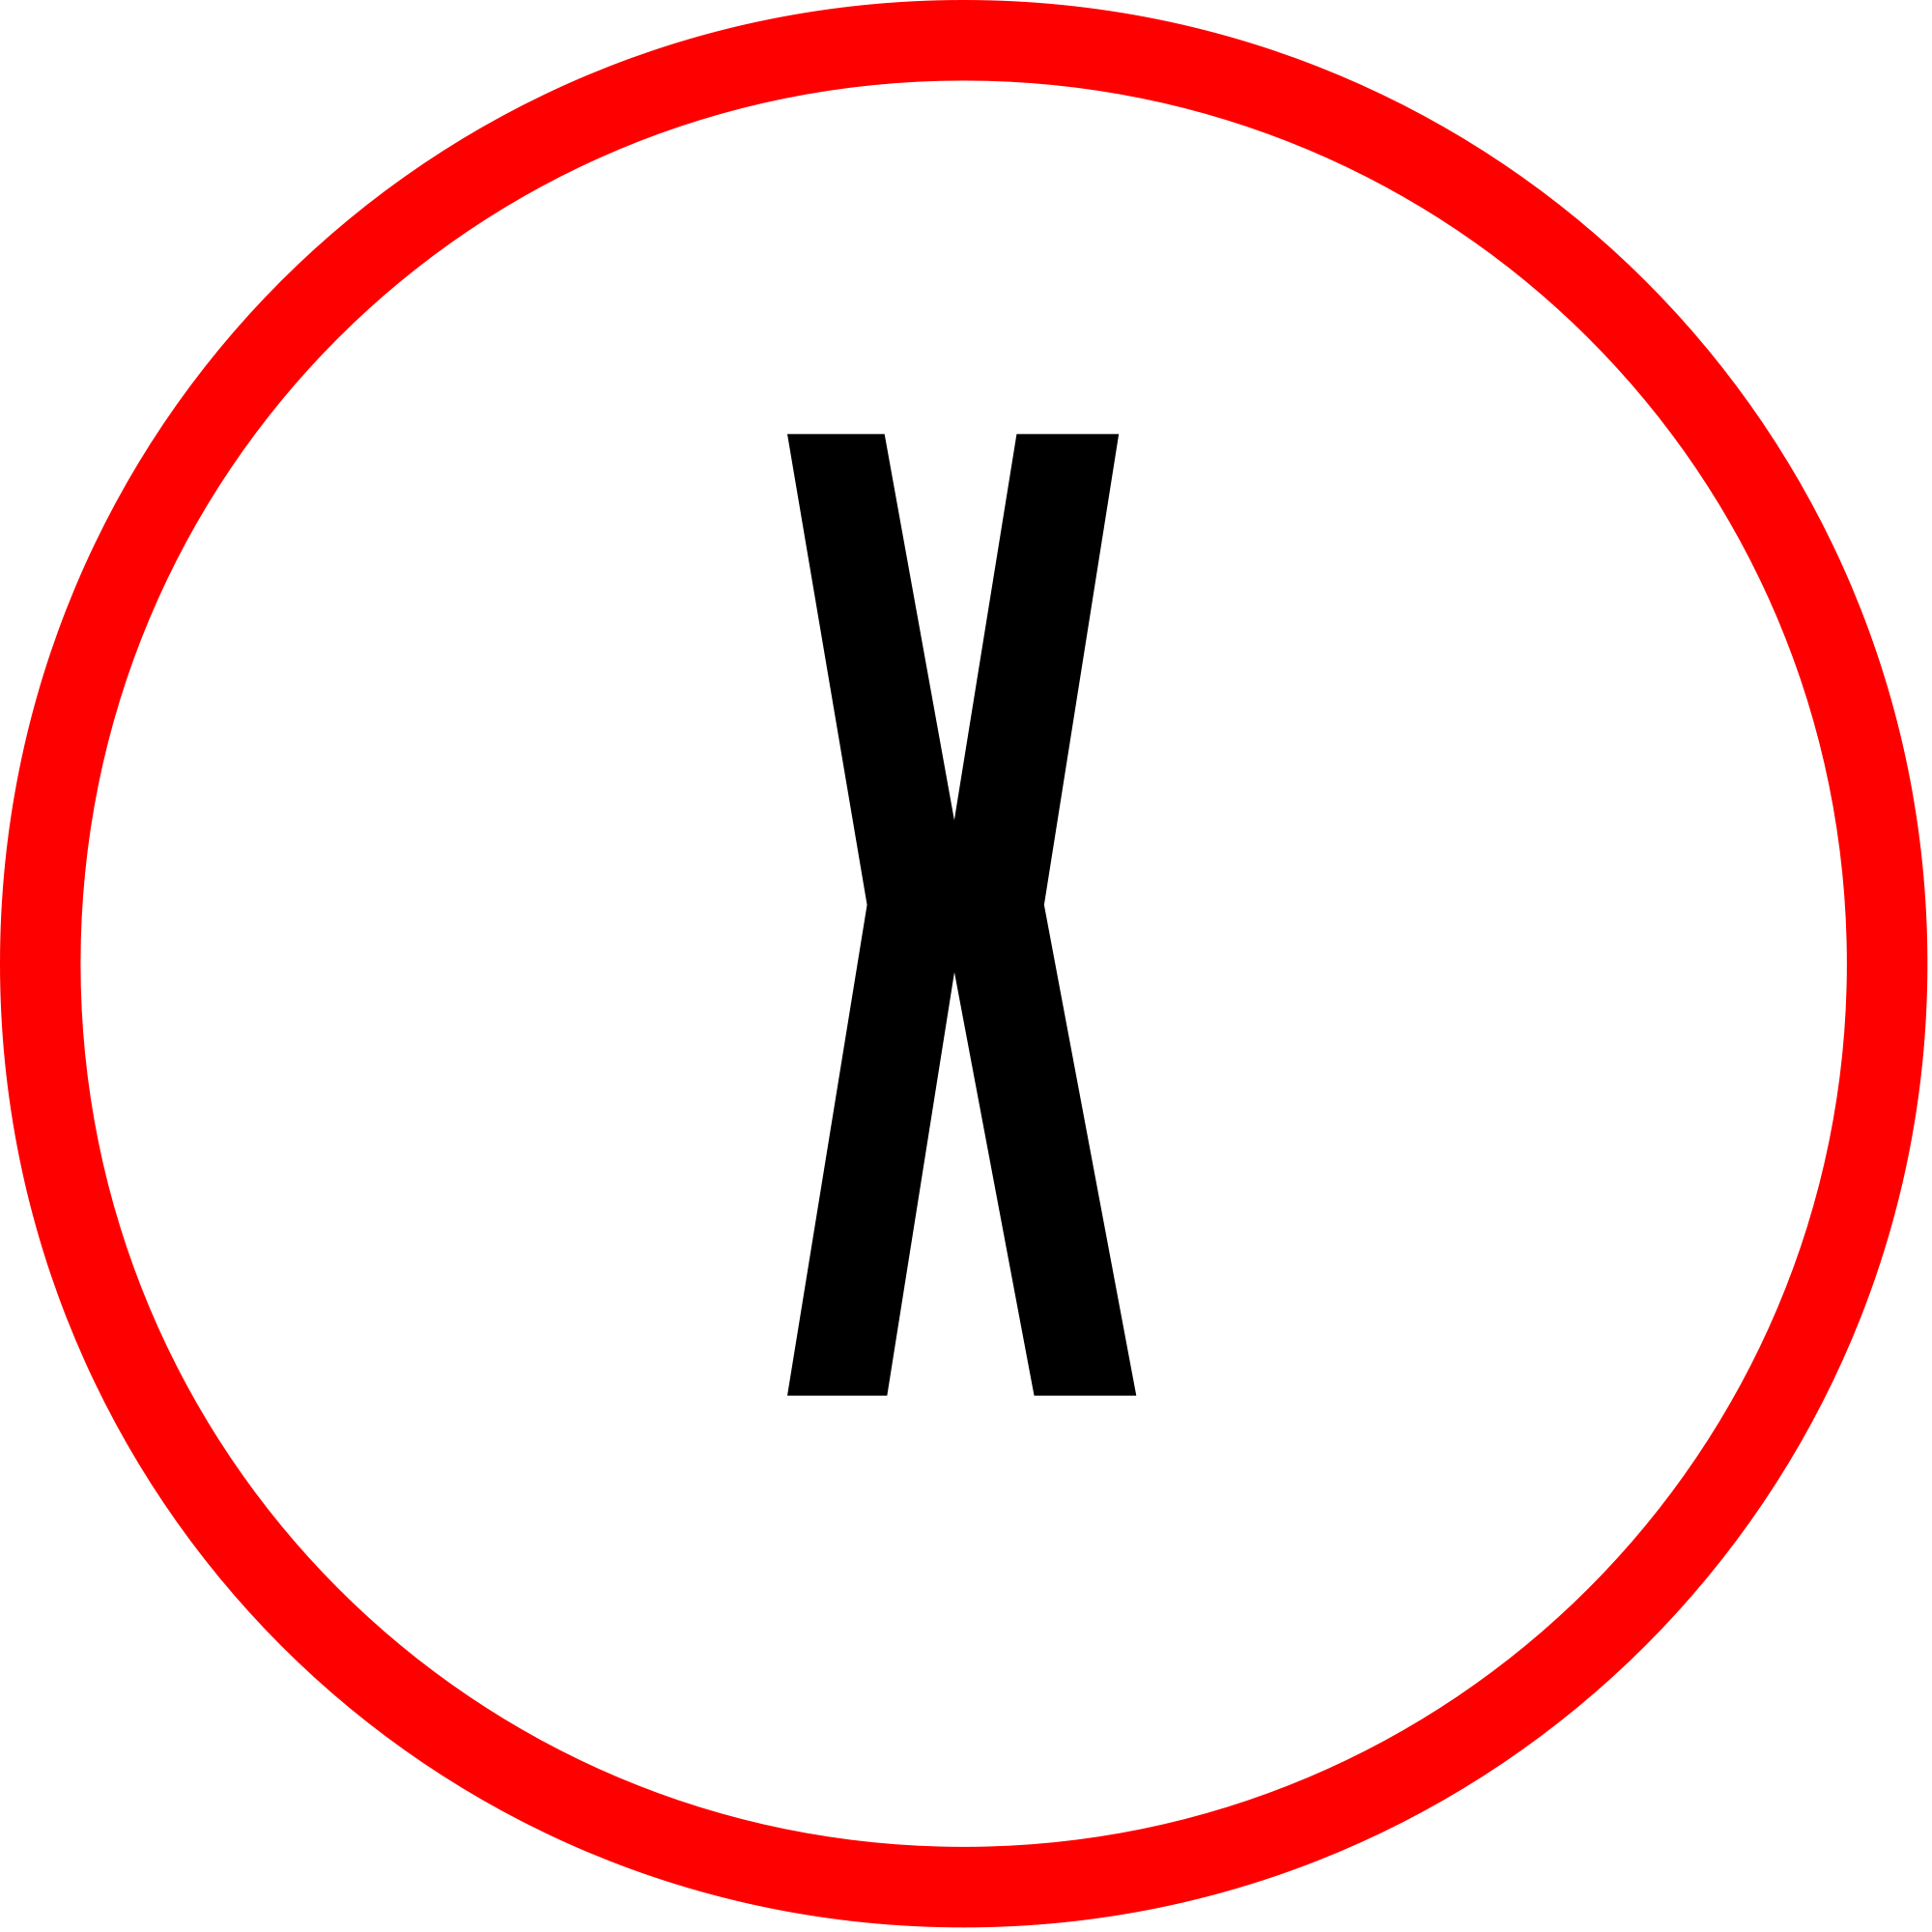 Transparent X Logo - File:X from The X-Files title logo.png - Wikimedia Commons